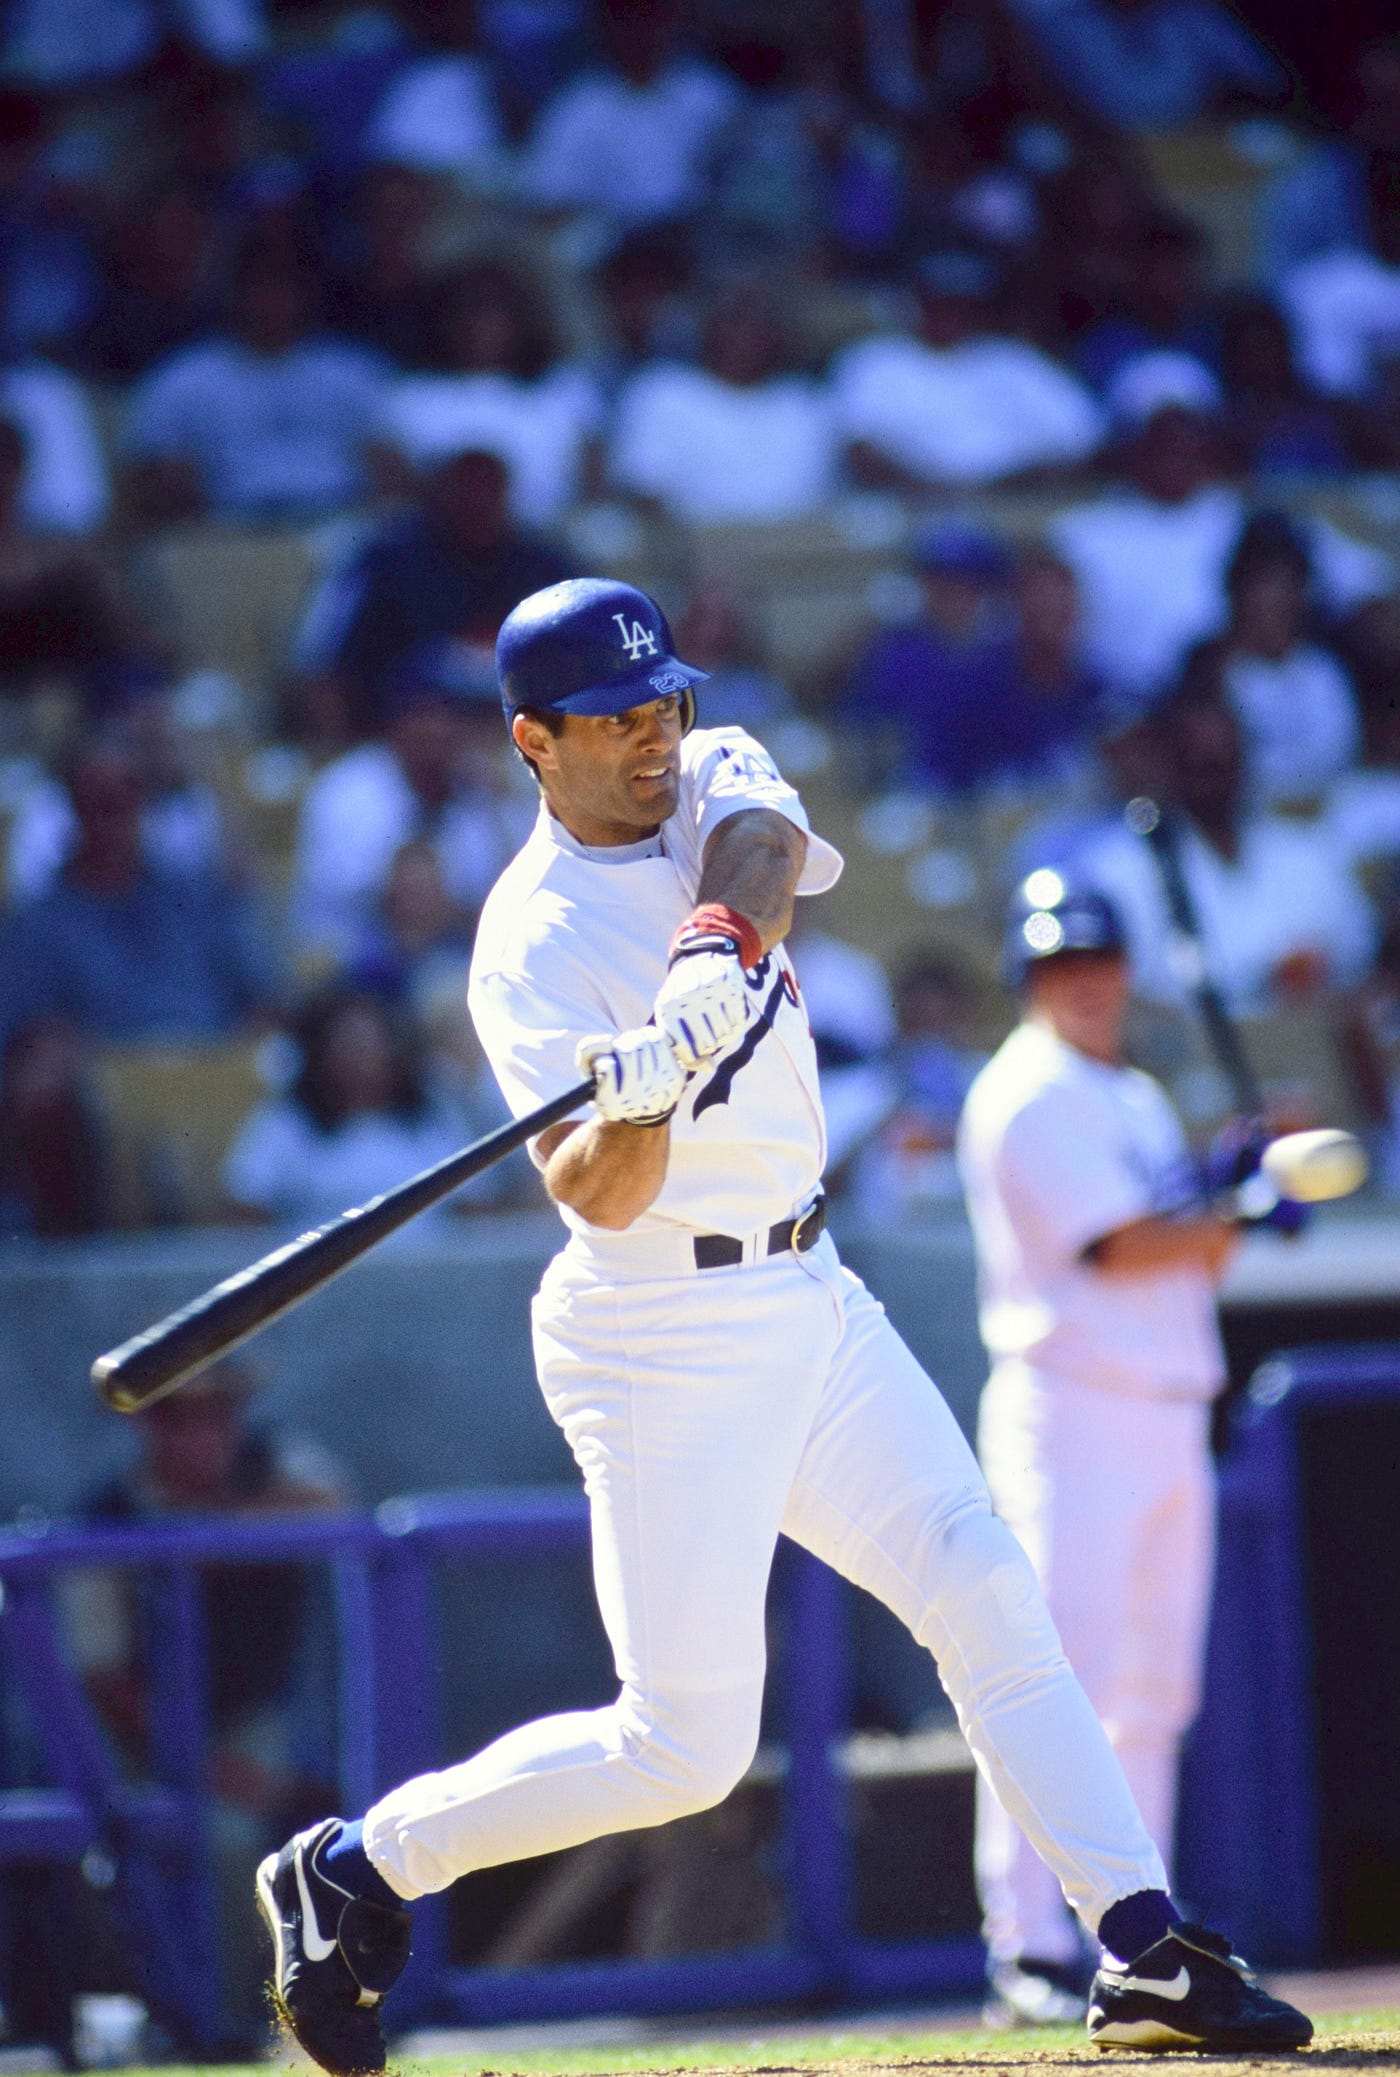 The Dodgers' hallowed records: Home run kings Snider and Karros